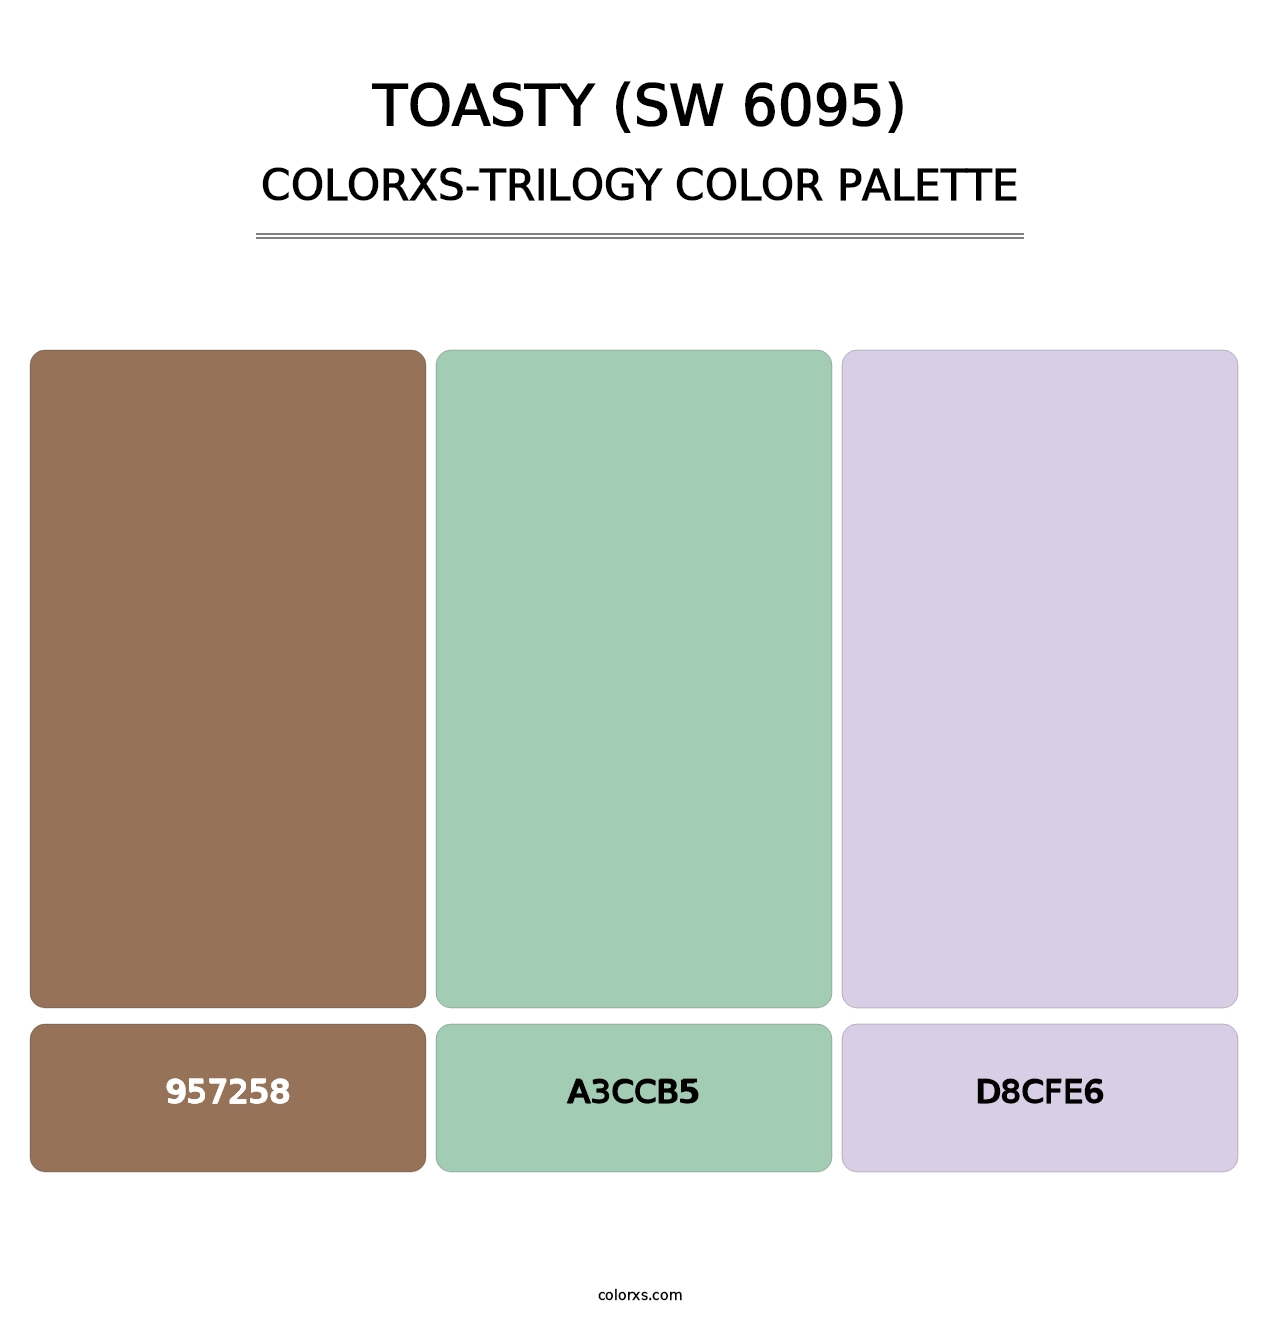 Toasty (SW 6095) - Colorxs Trilogy Palette